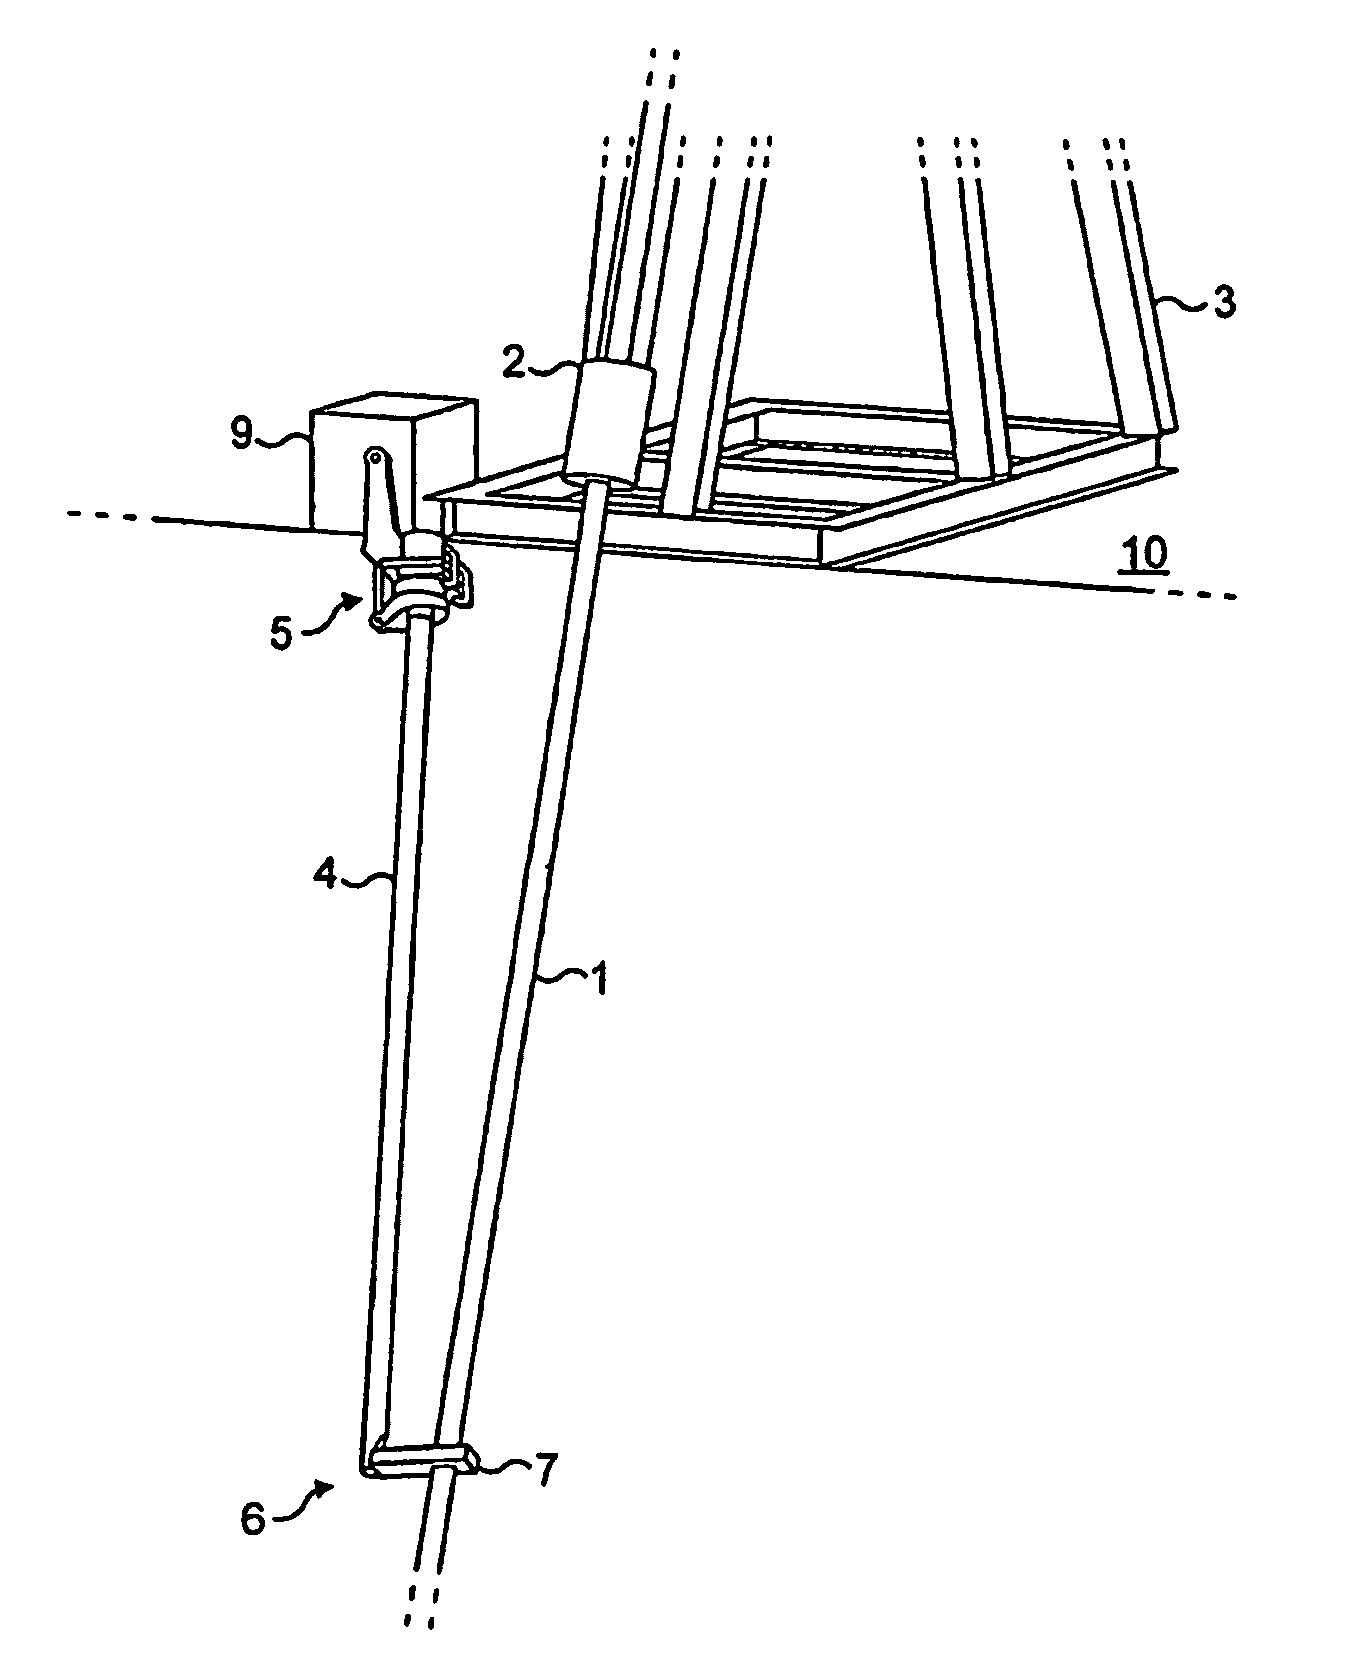 Apparatus and method for use in laying or recovering offshore pipelines or cables